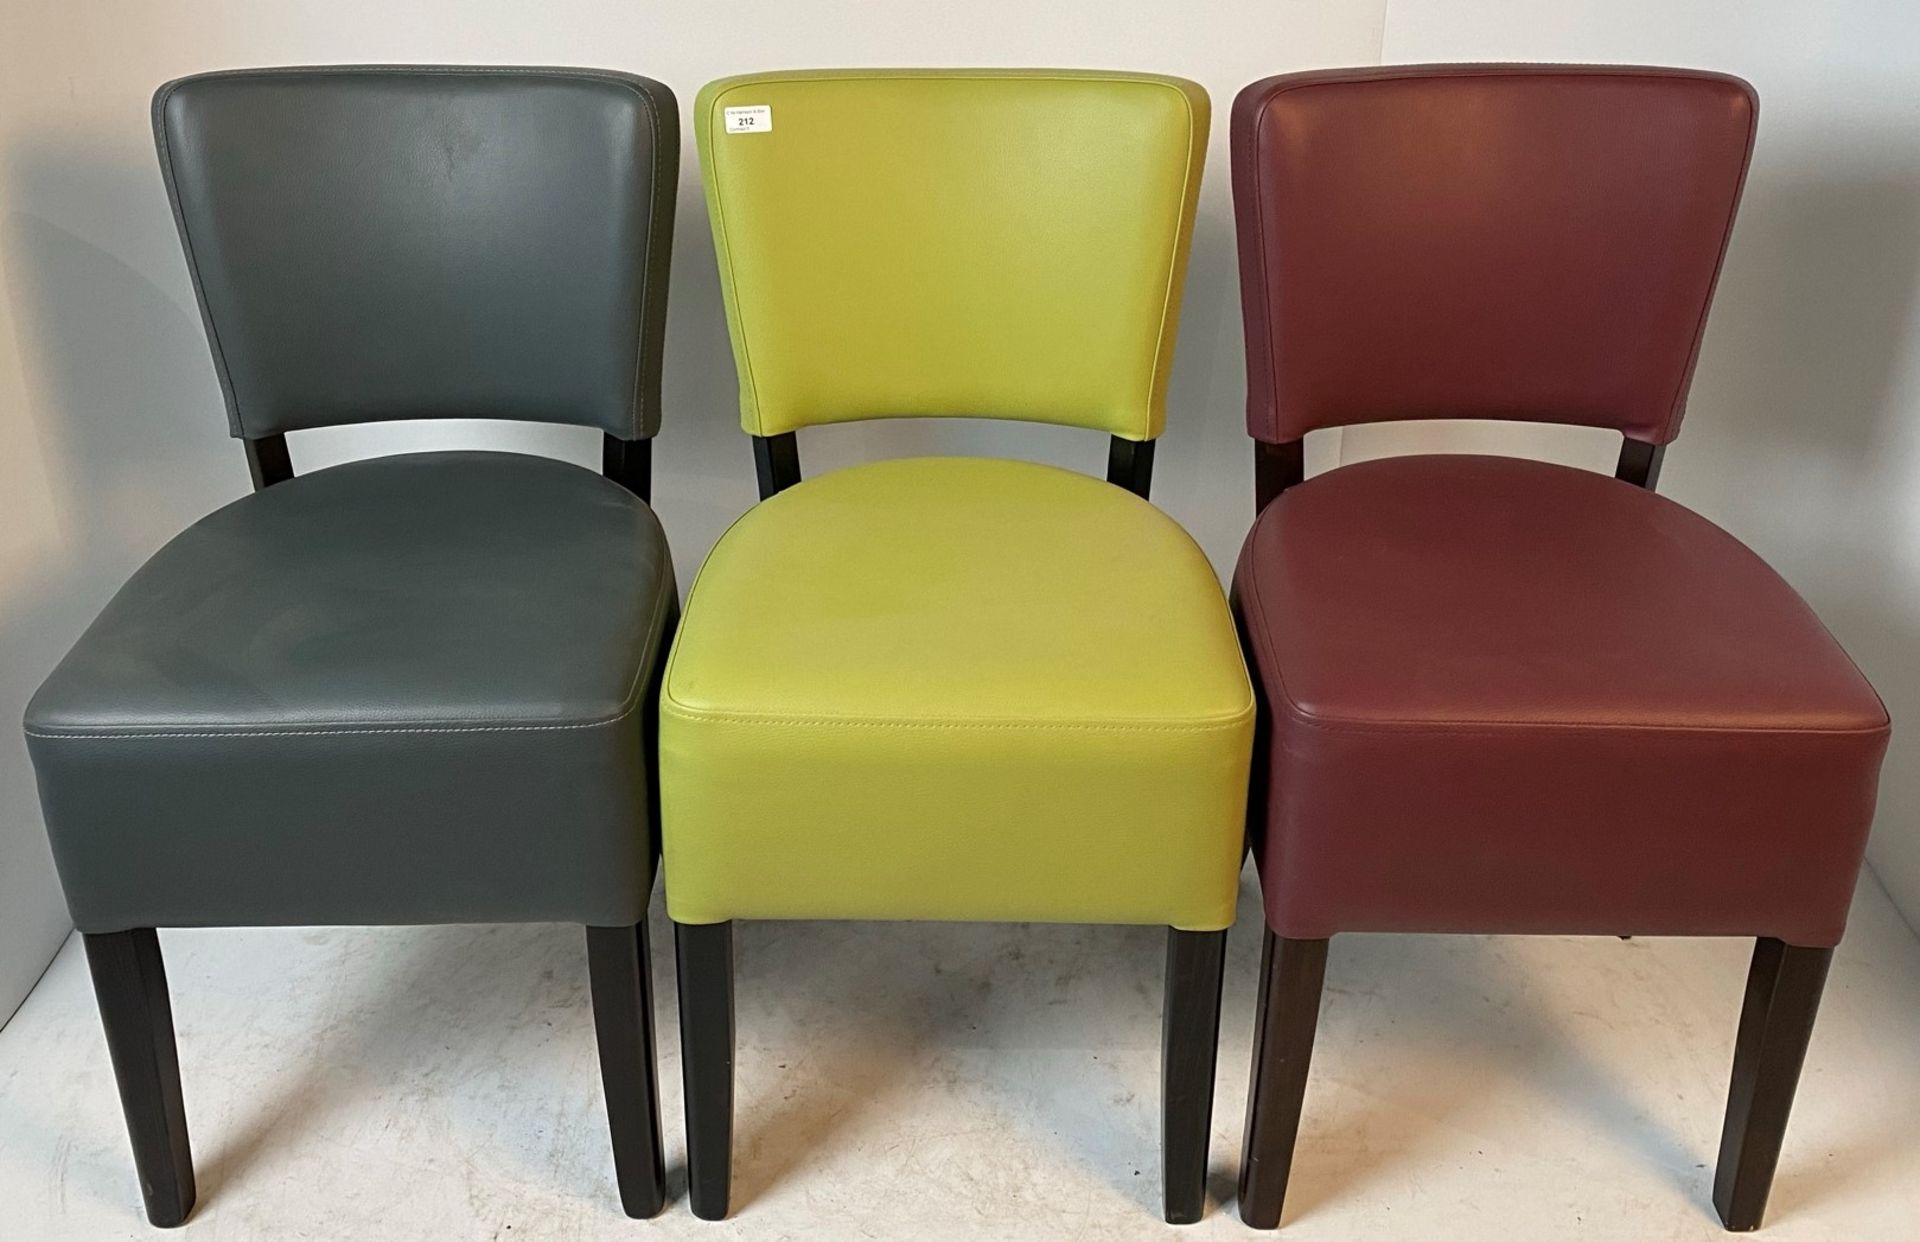 3 x assorted Memphis side/dining chairs - Vena SA4,